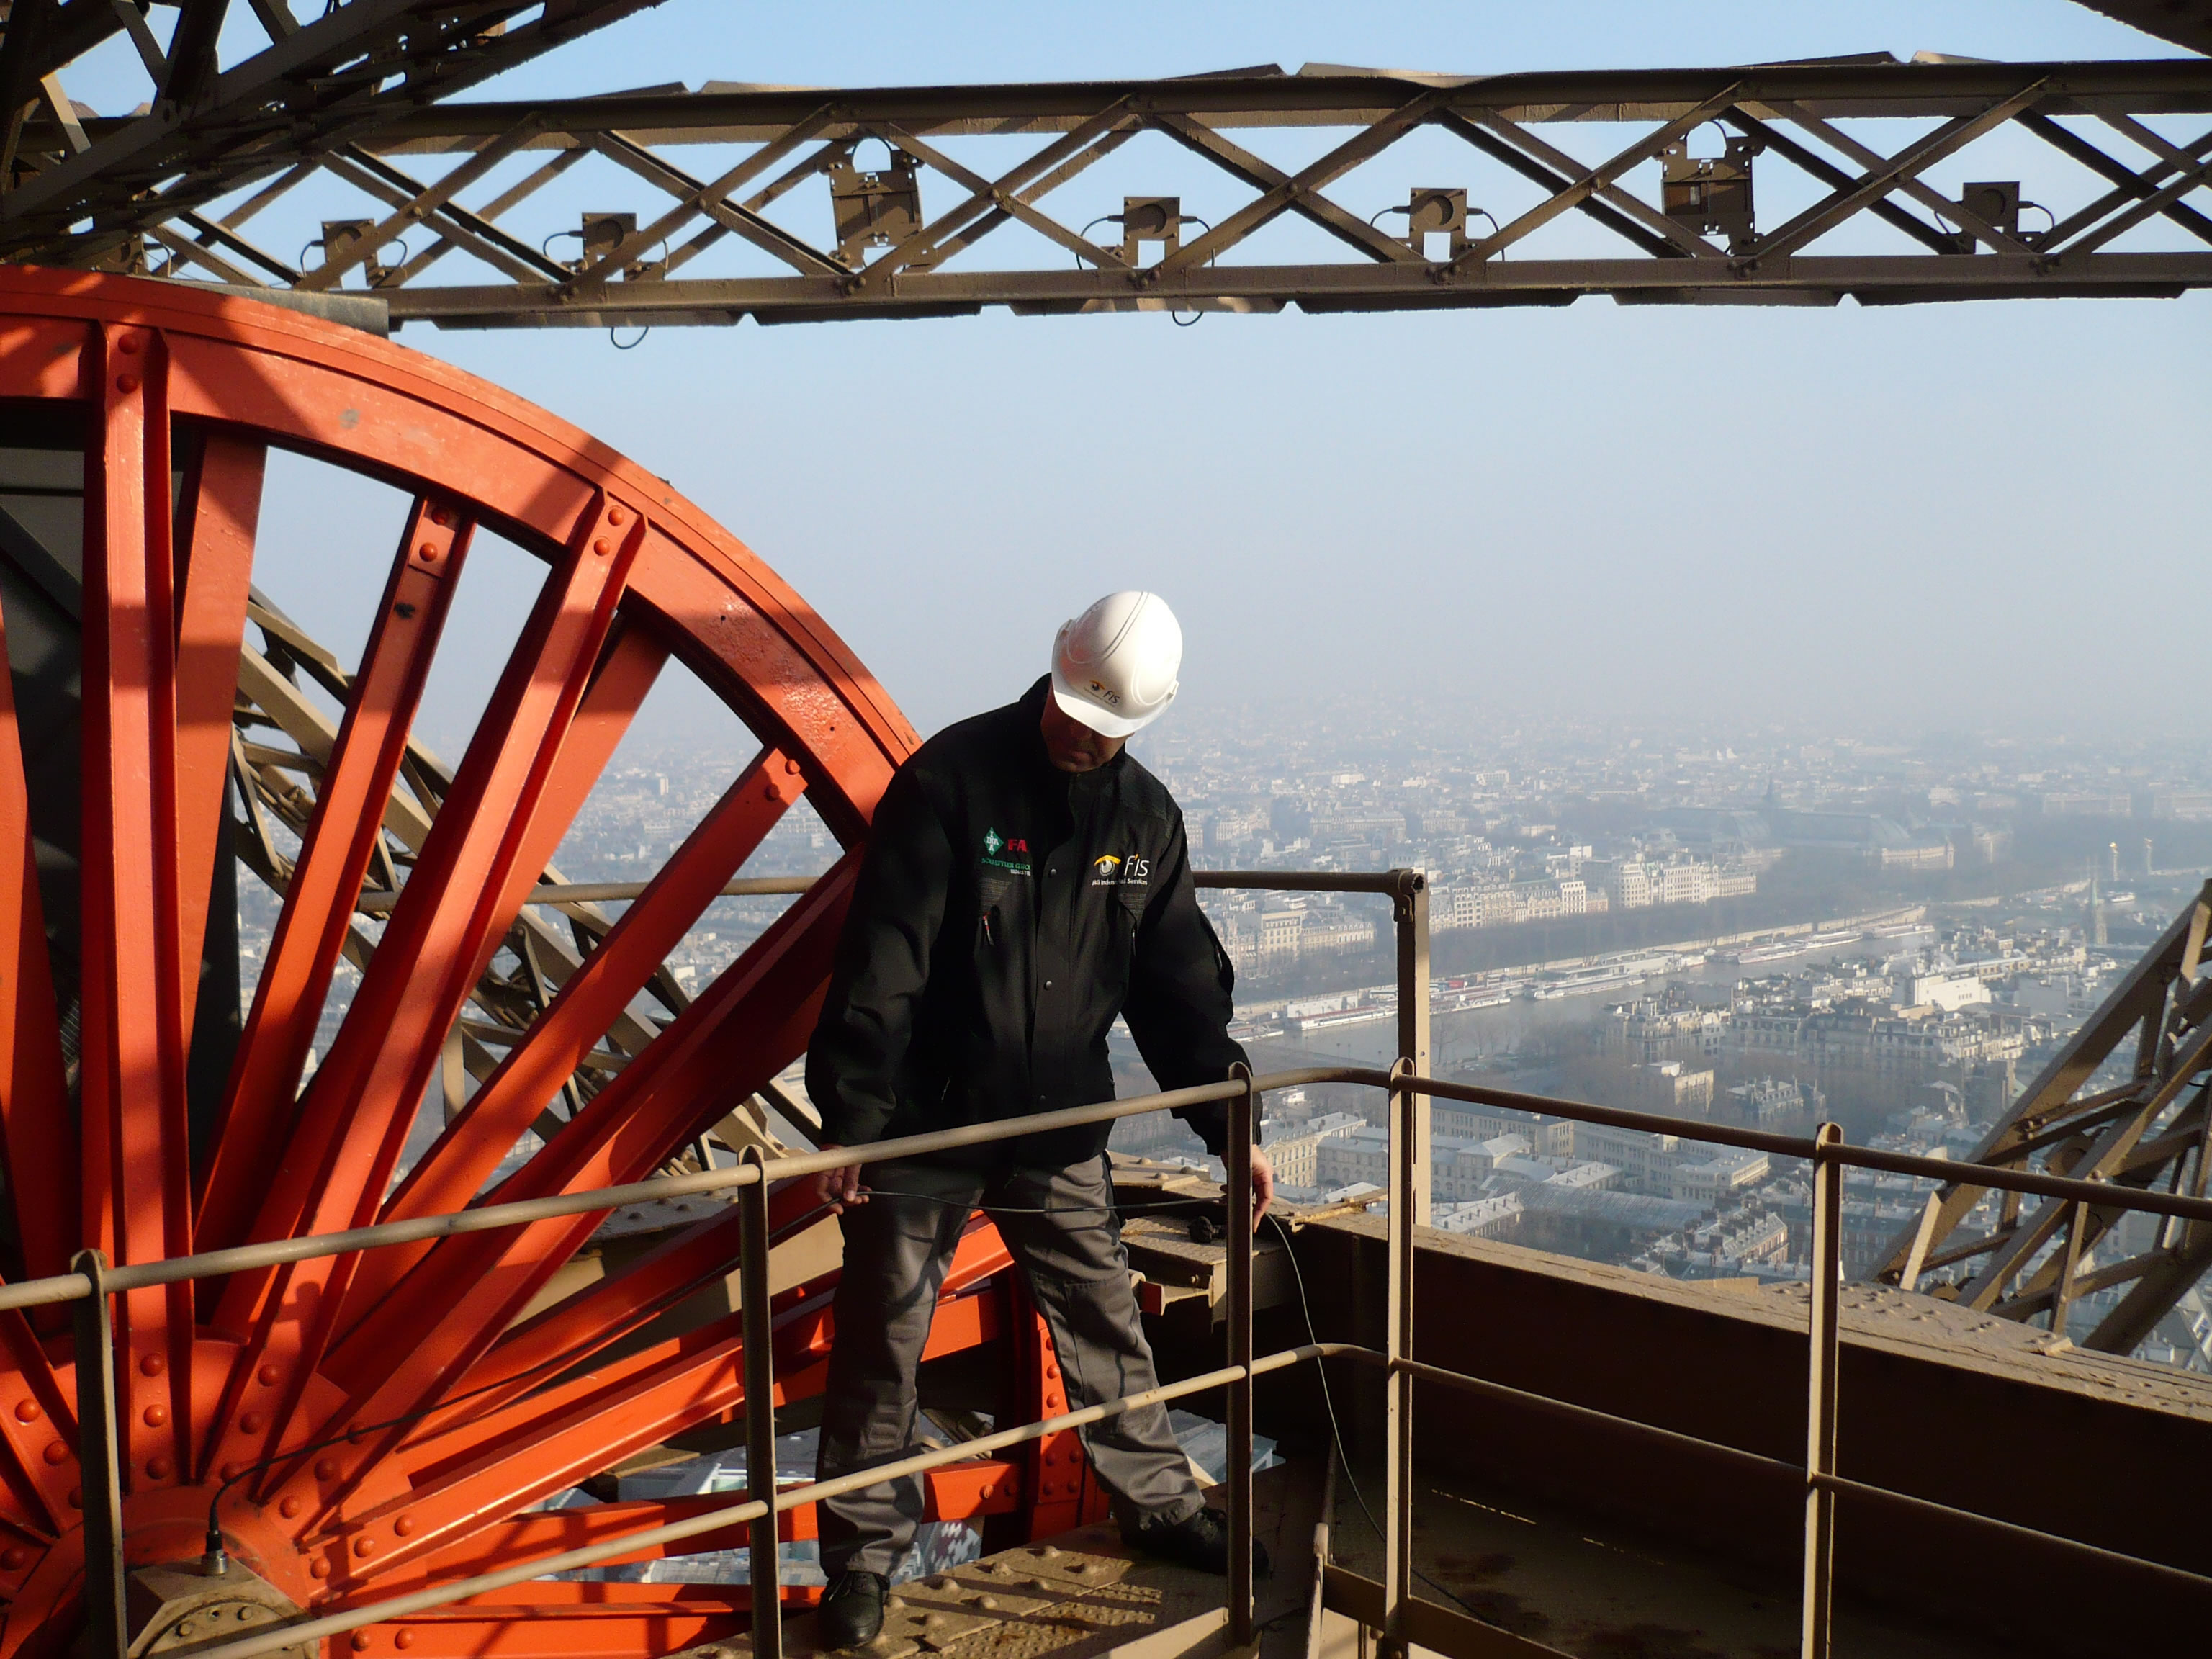 Ensuring safe elevator rides at the Eiffel Tower